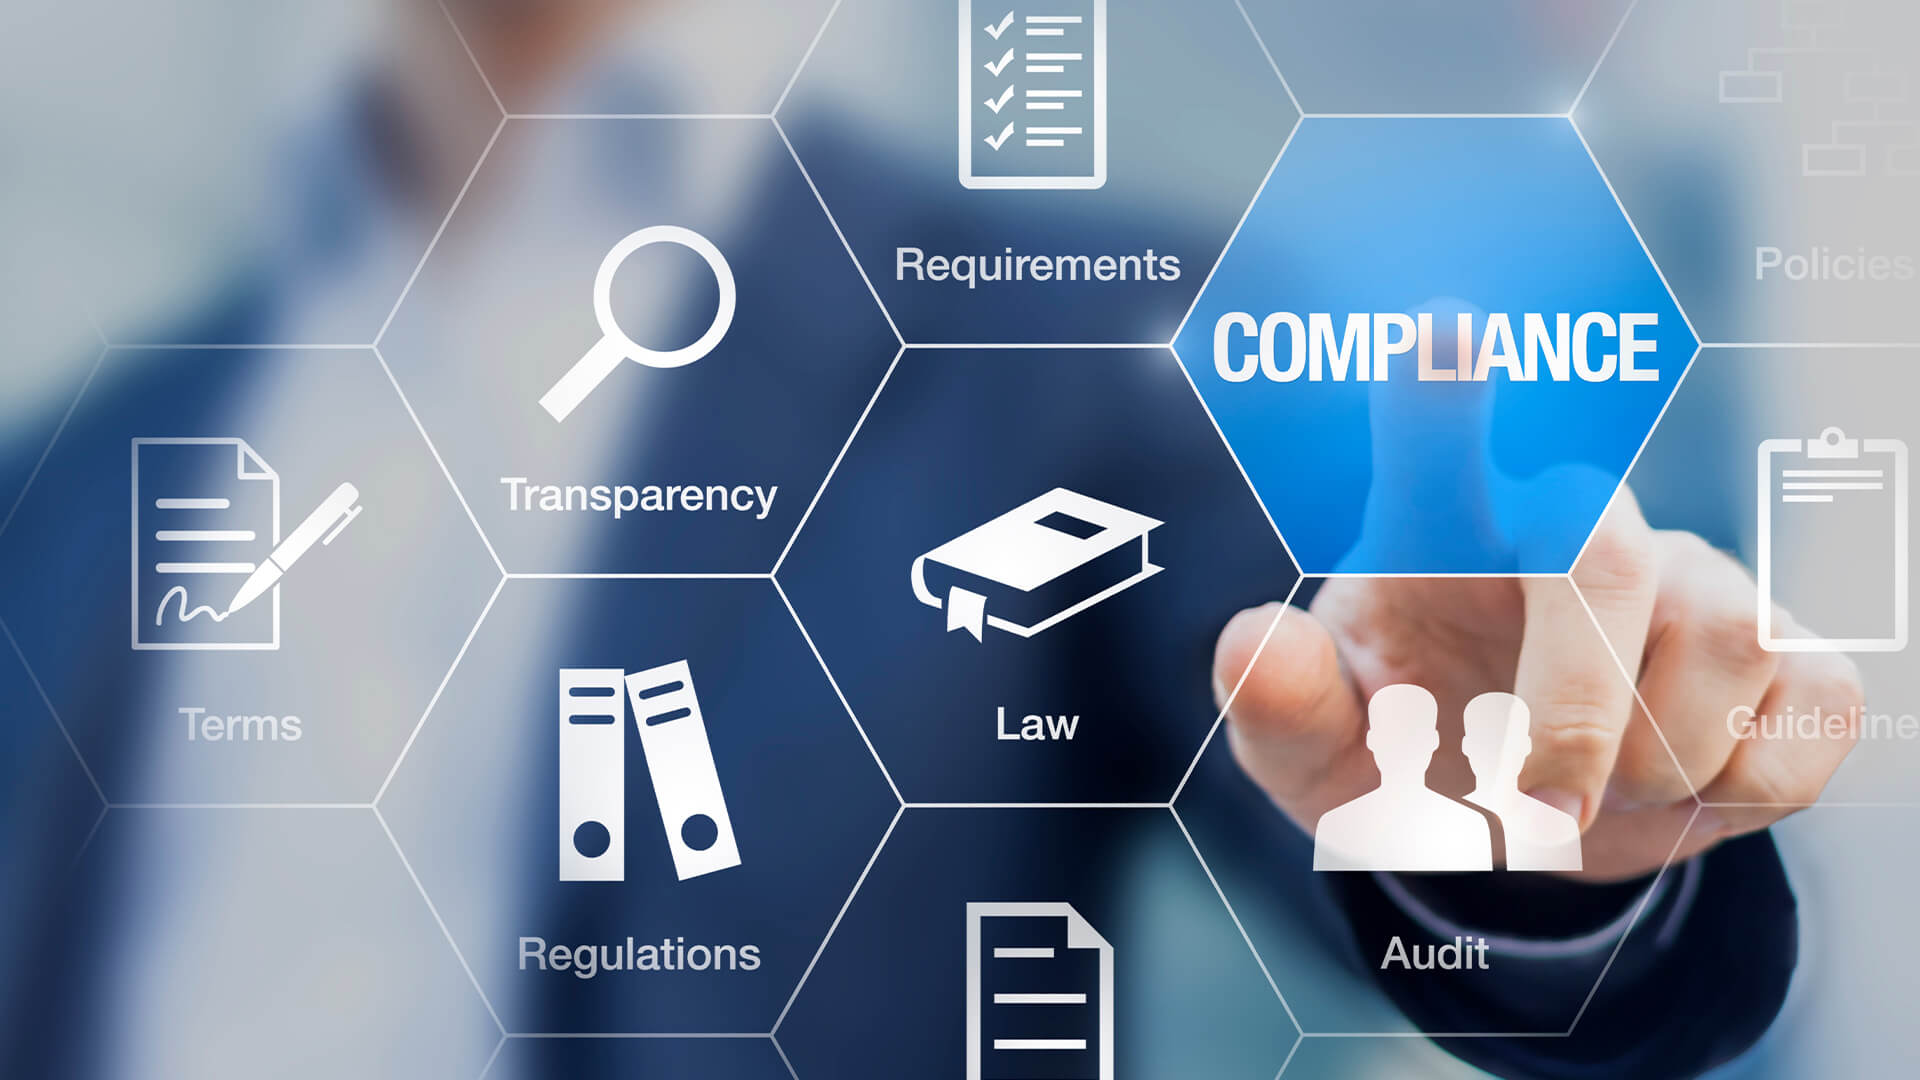 Compliance Risks: 5 Examples and Solutions - Acquisition International